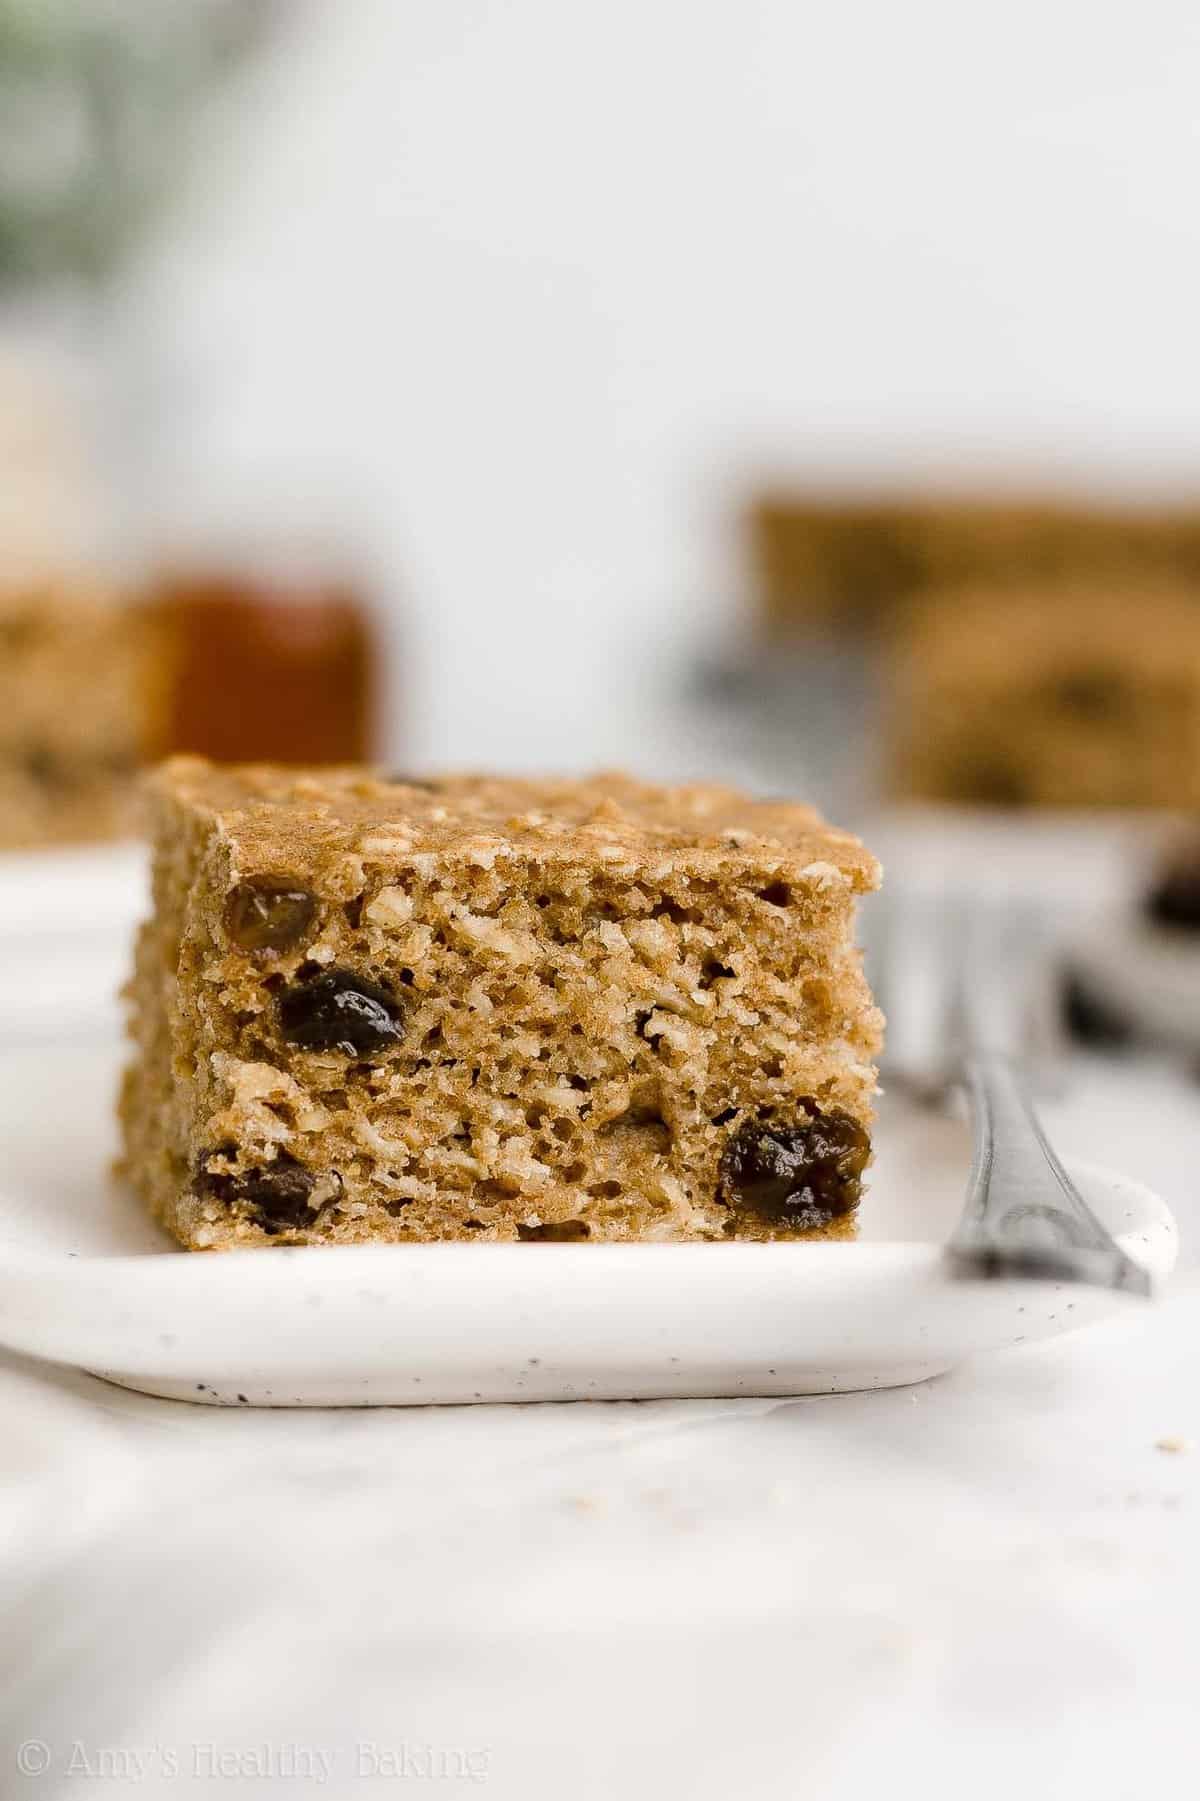  These oatmeal cakes are the perfect breakfast for a busy morning!